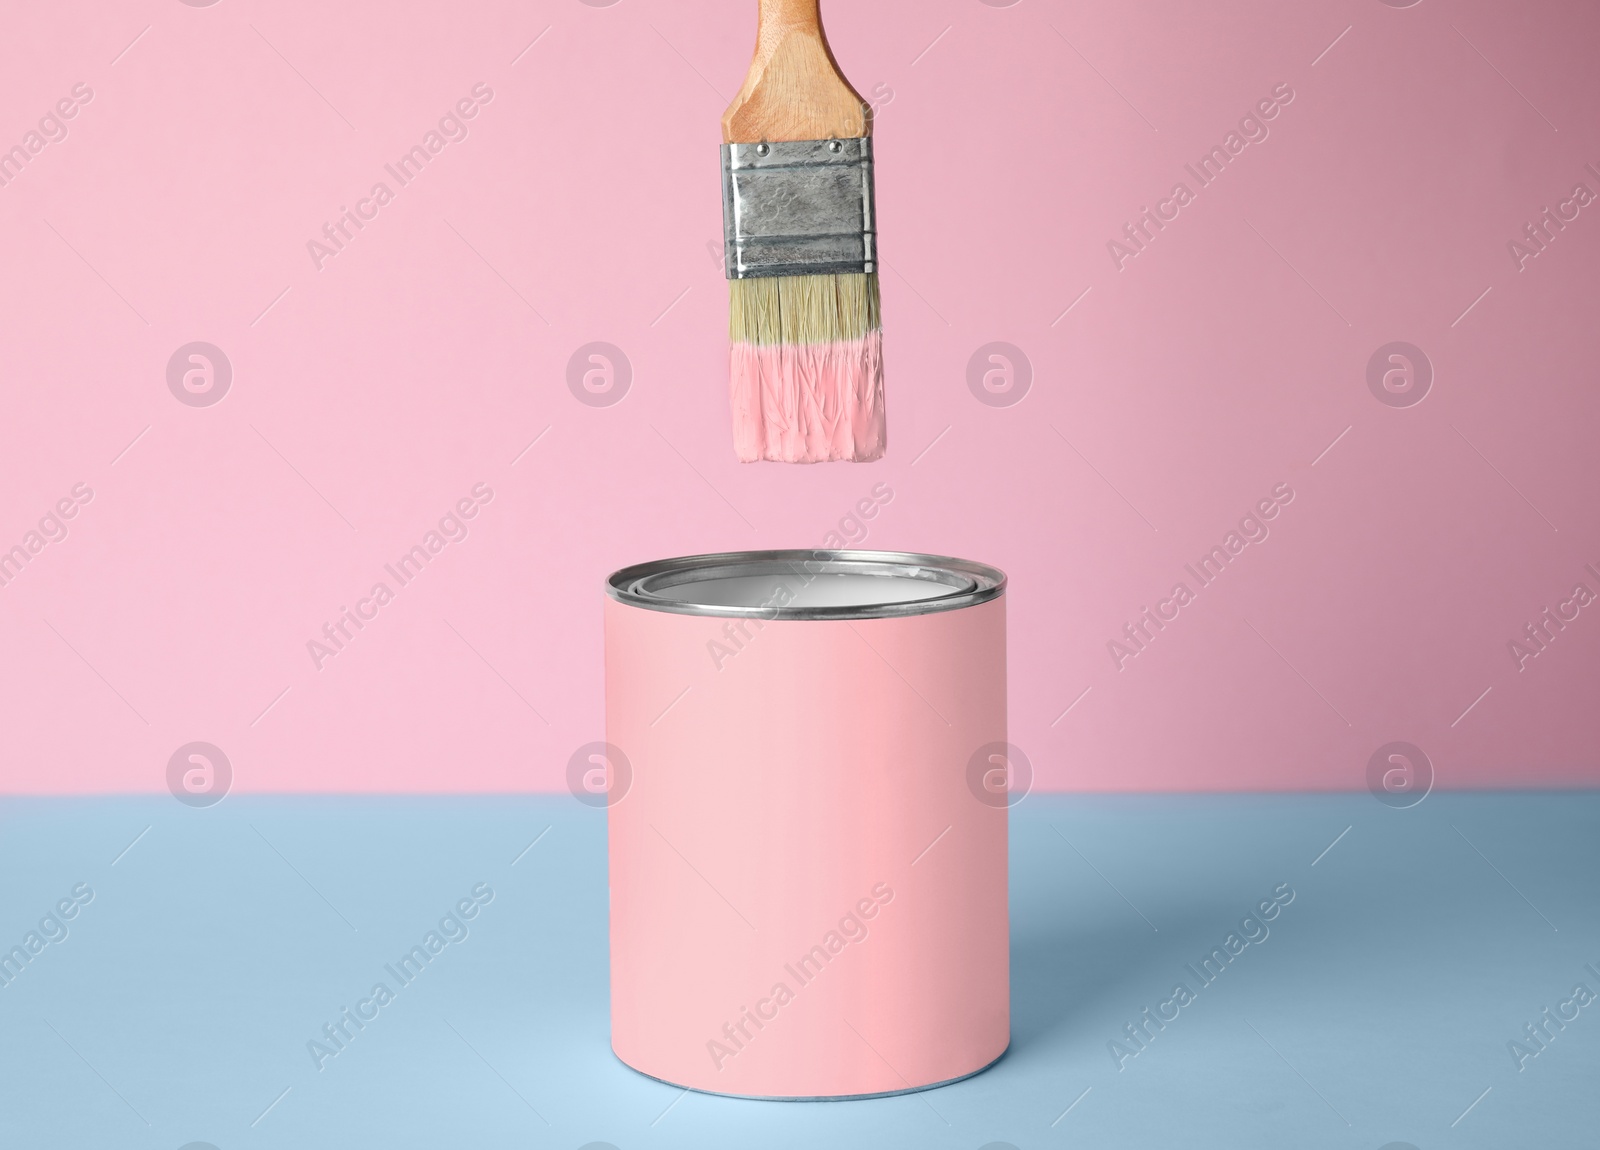 Photo of Brush over can of pink paint on blue table